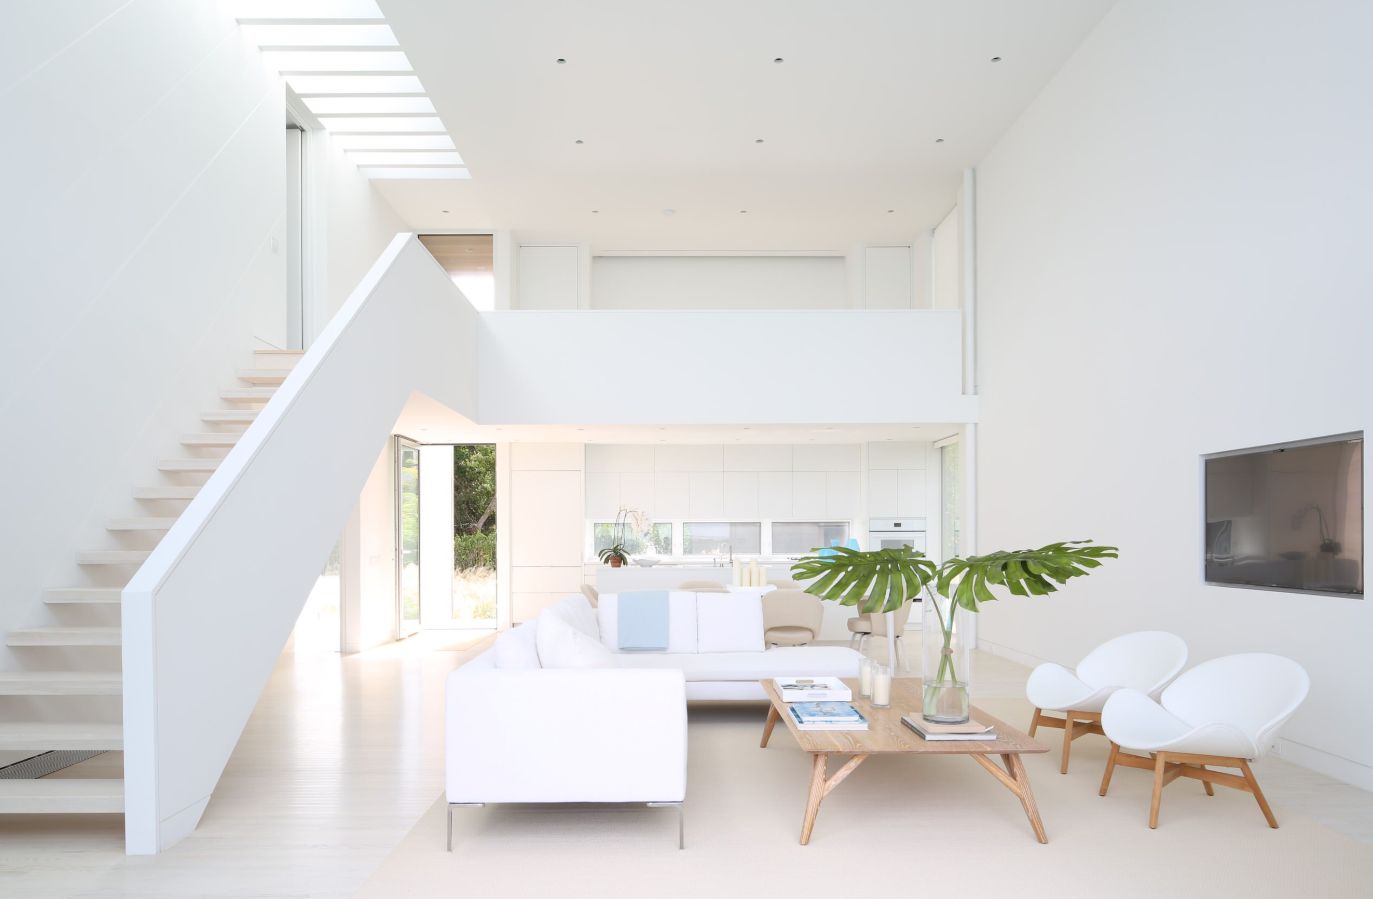 Pure white furniture and matching walls, floors and ceilings make this space seem bright despite the lack of windows